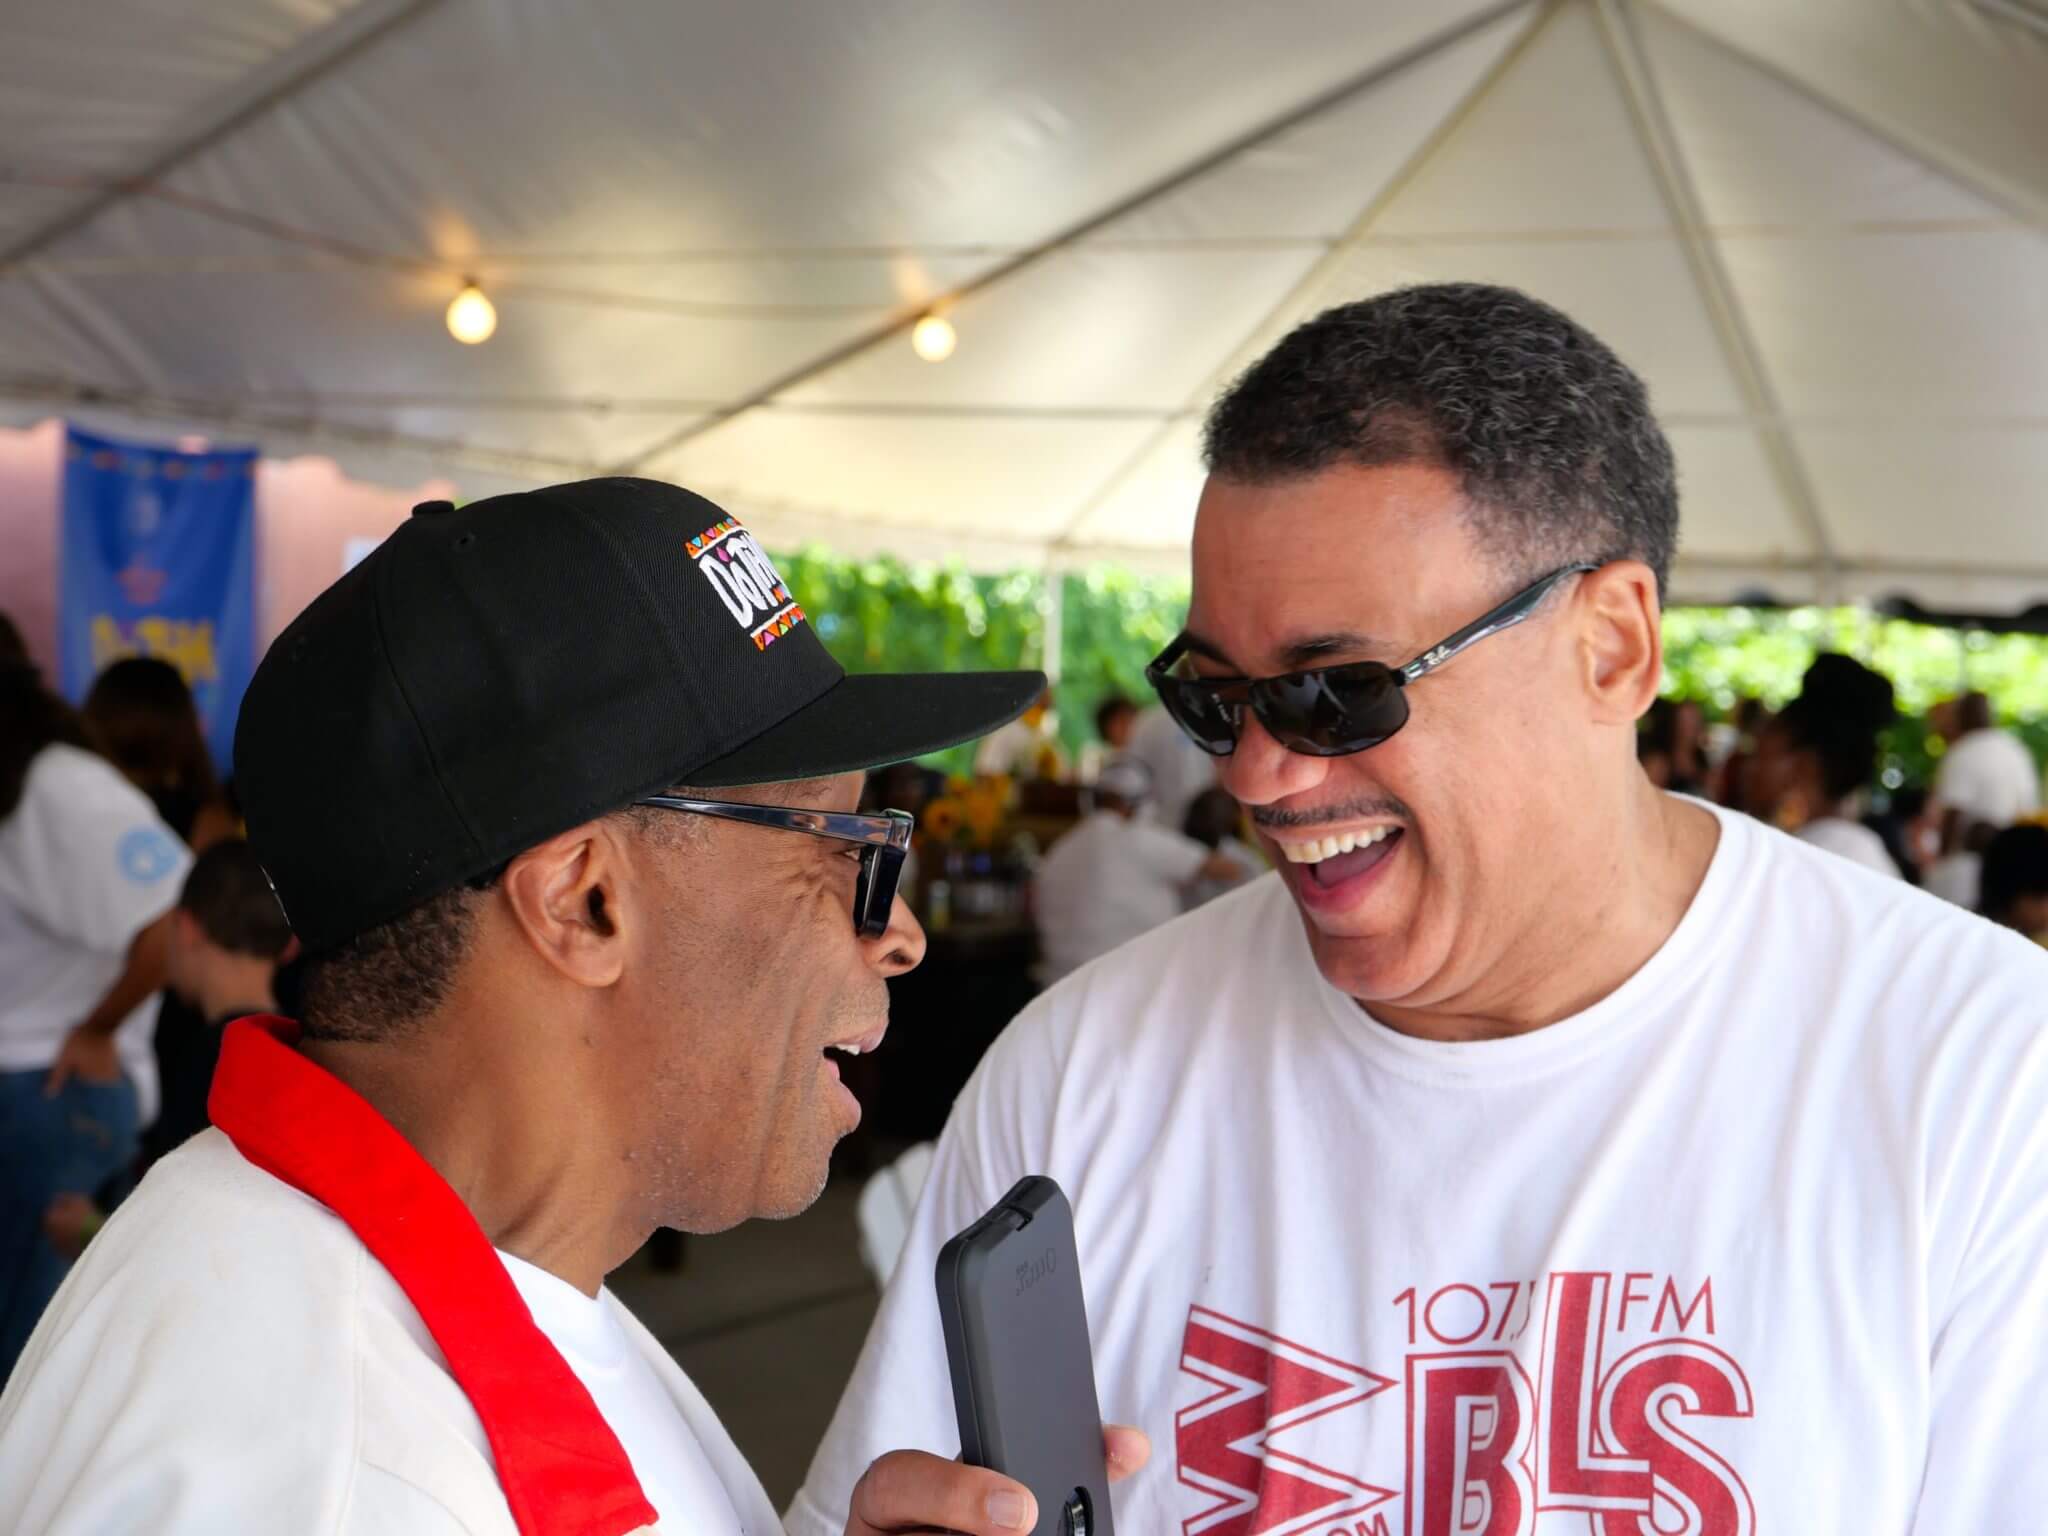 Spike Lee interviewed on location by WBLS' Dr. Bob Lee